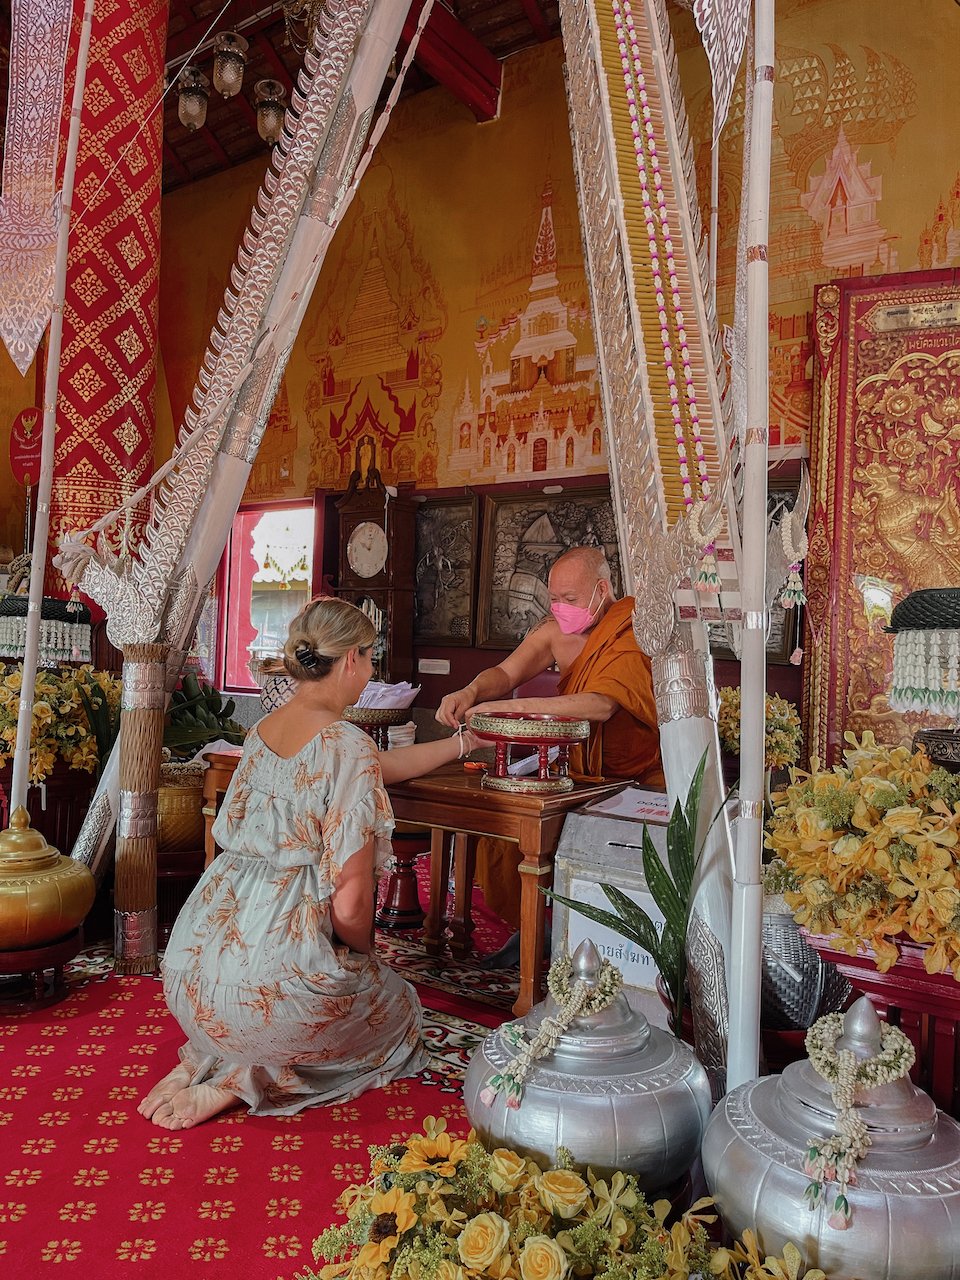 Getting blessed by a monk at Wat Sri Suphan - Chiang Mai - Northern Thailand